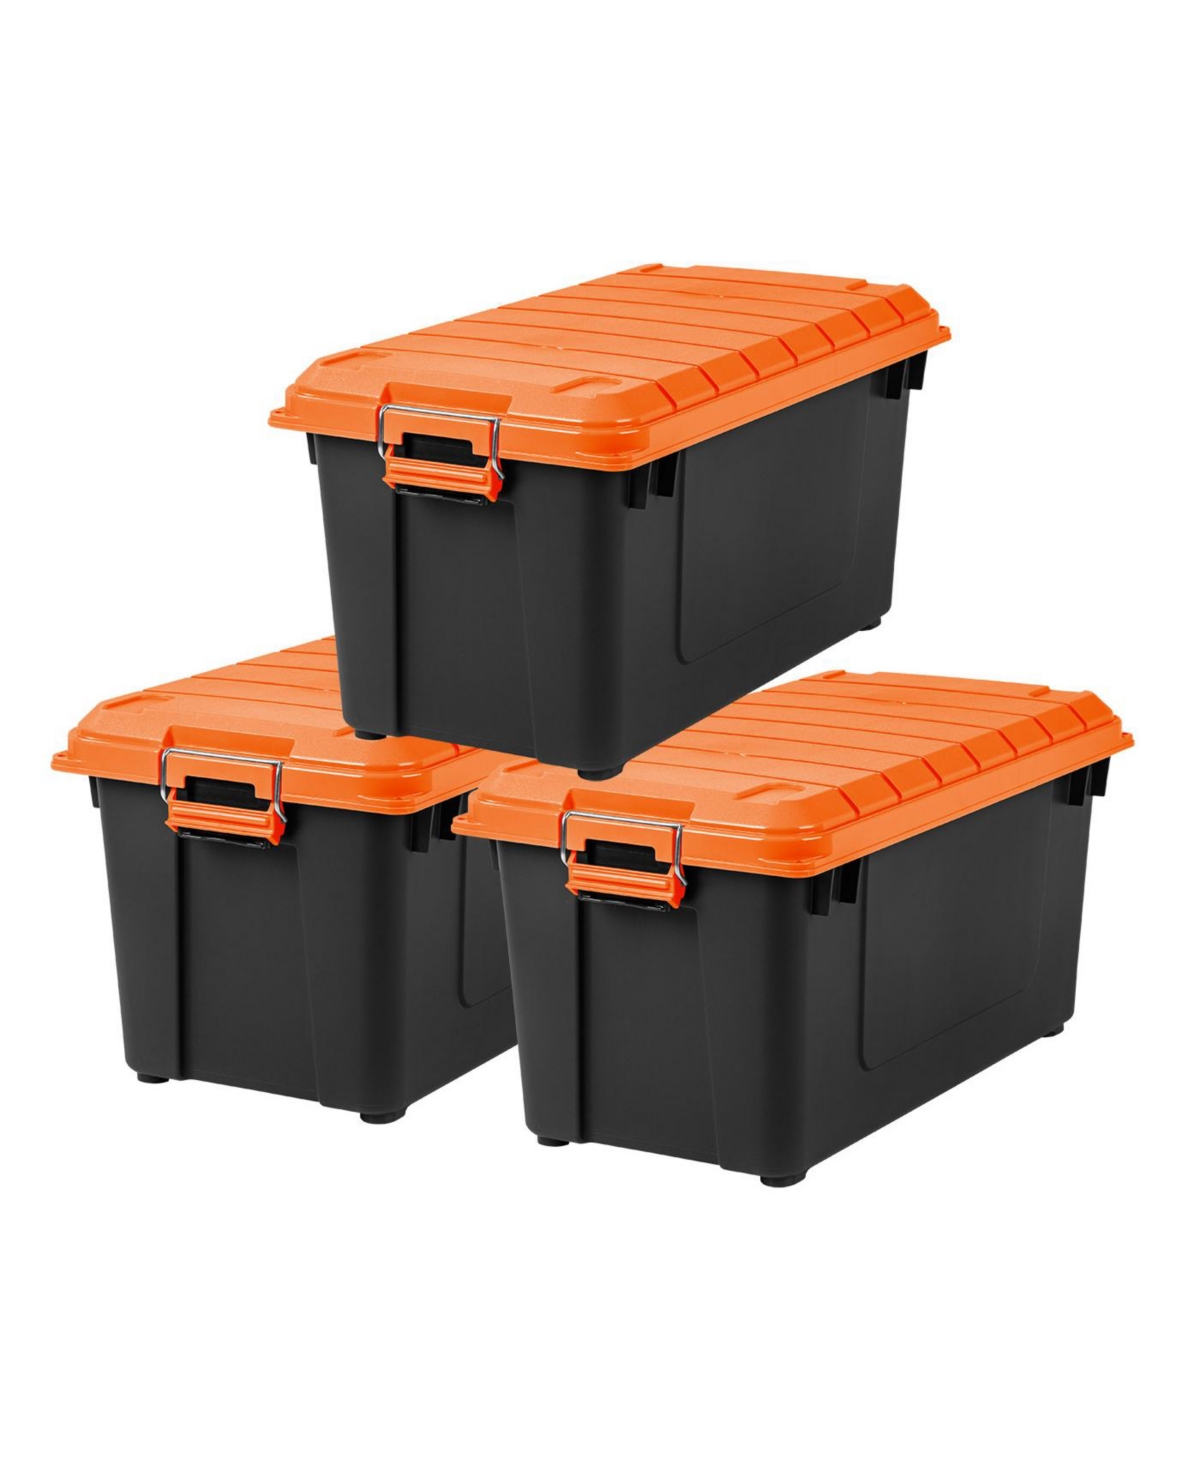 21 Gallon Heavy-Duty Plastic Storage Bins, Store-It-All Container Totes with Durable Lid and Secure Latching Buckles, Black/Orange, 3 Pack - Orange